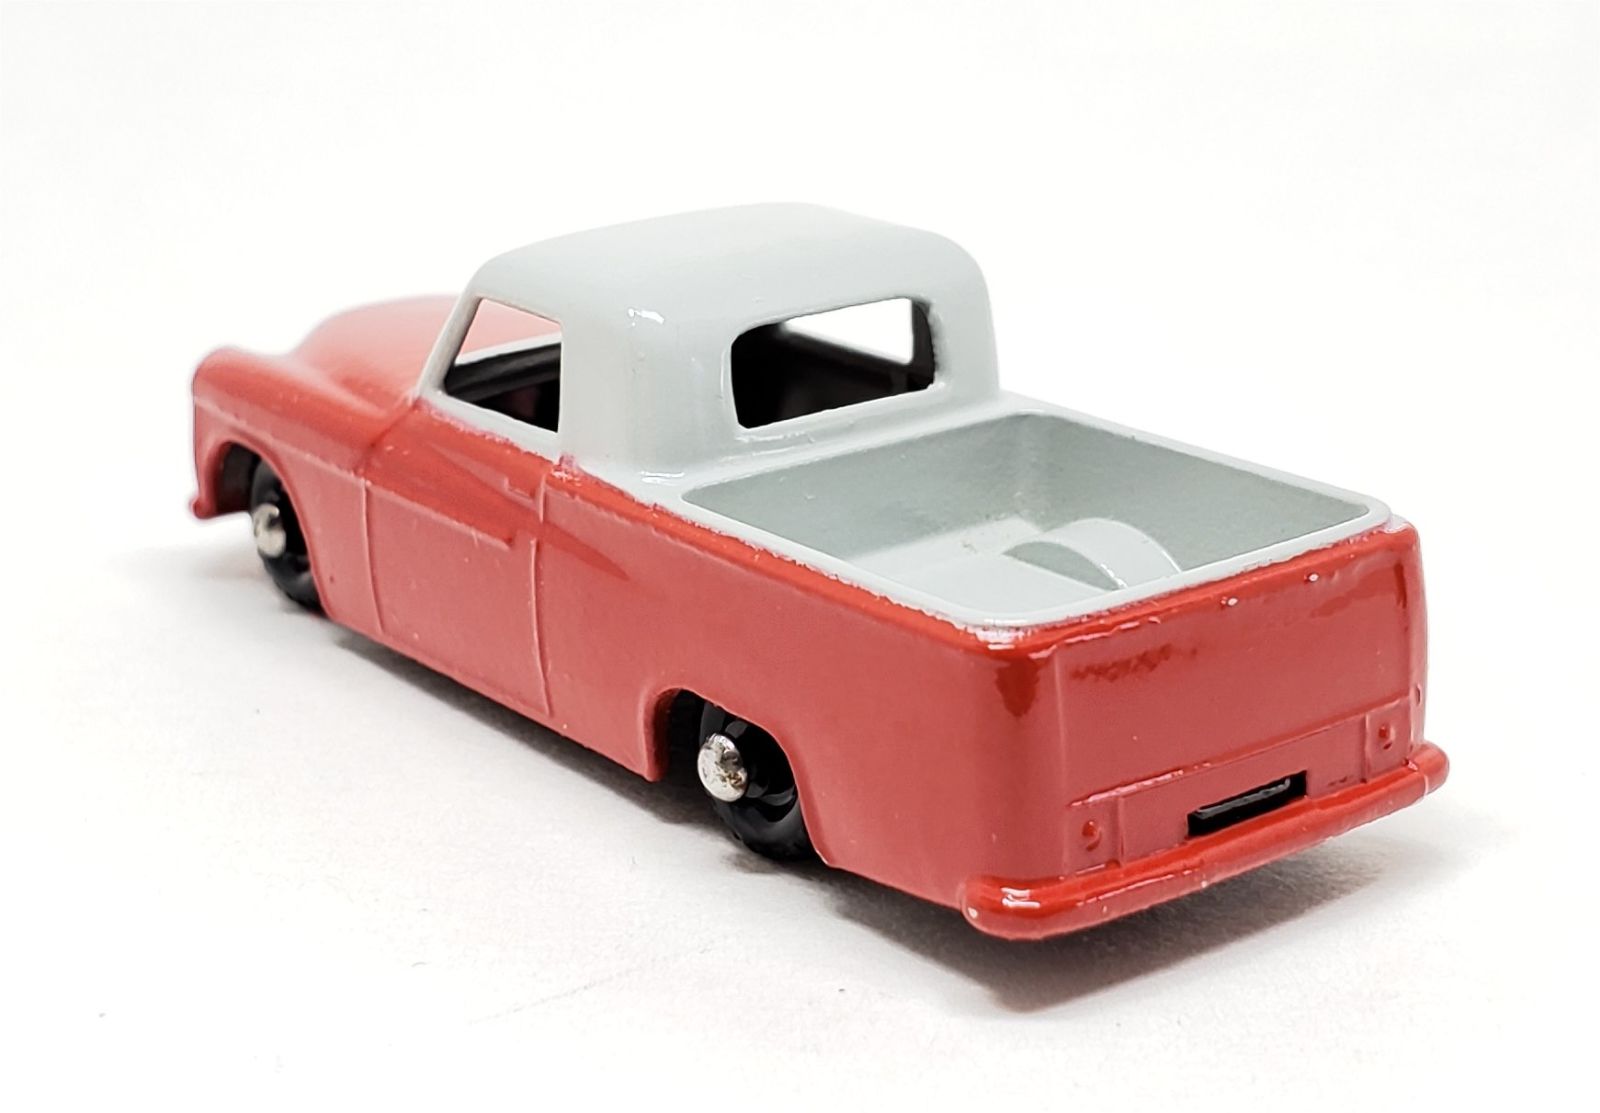 Illustration for article titled [REVIEW] Lesney Matchbox Commer Pick-Up MK VIII - another one